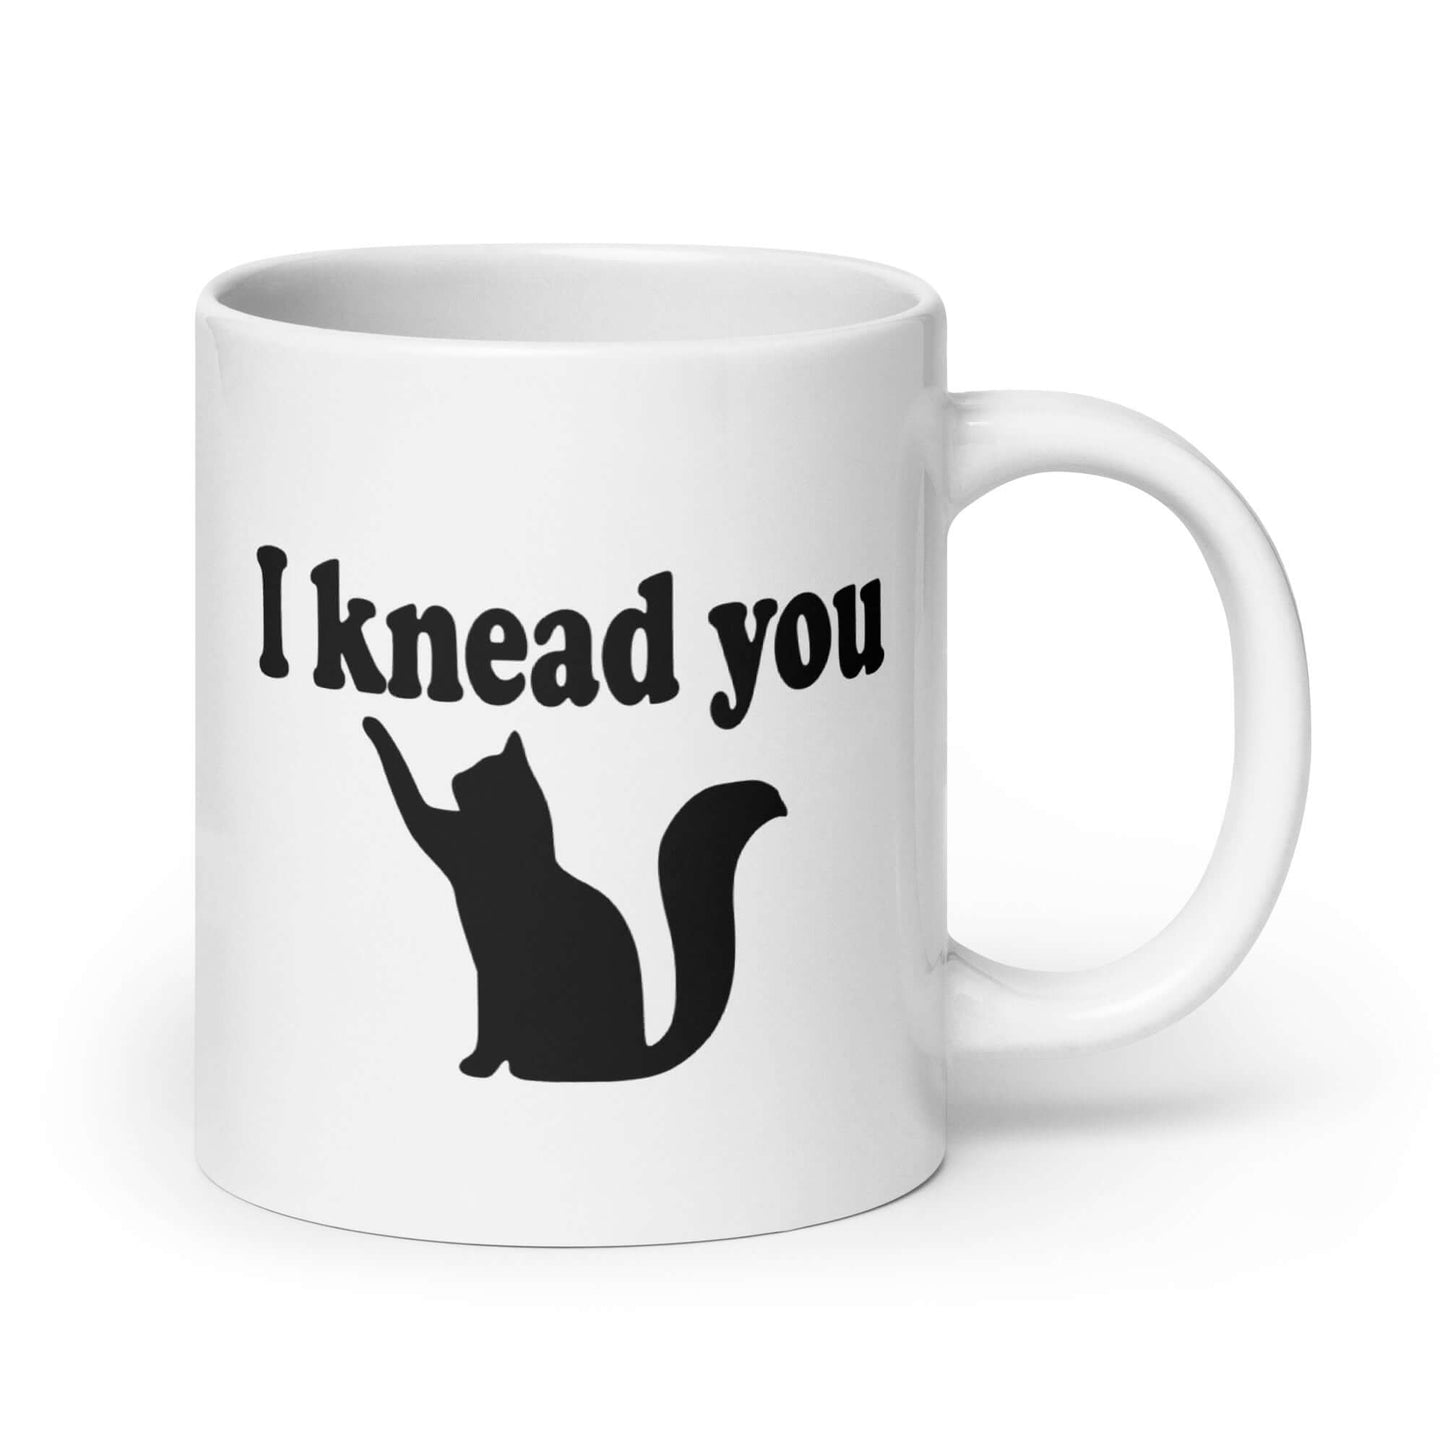 White ceramic coffee mug that has a pun image of a silhouette of a cat and the words I knead you printed on both sides of the mug.